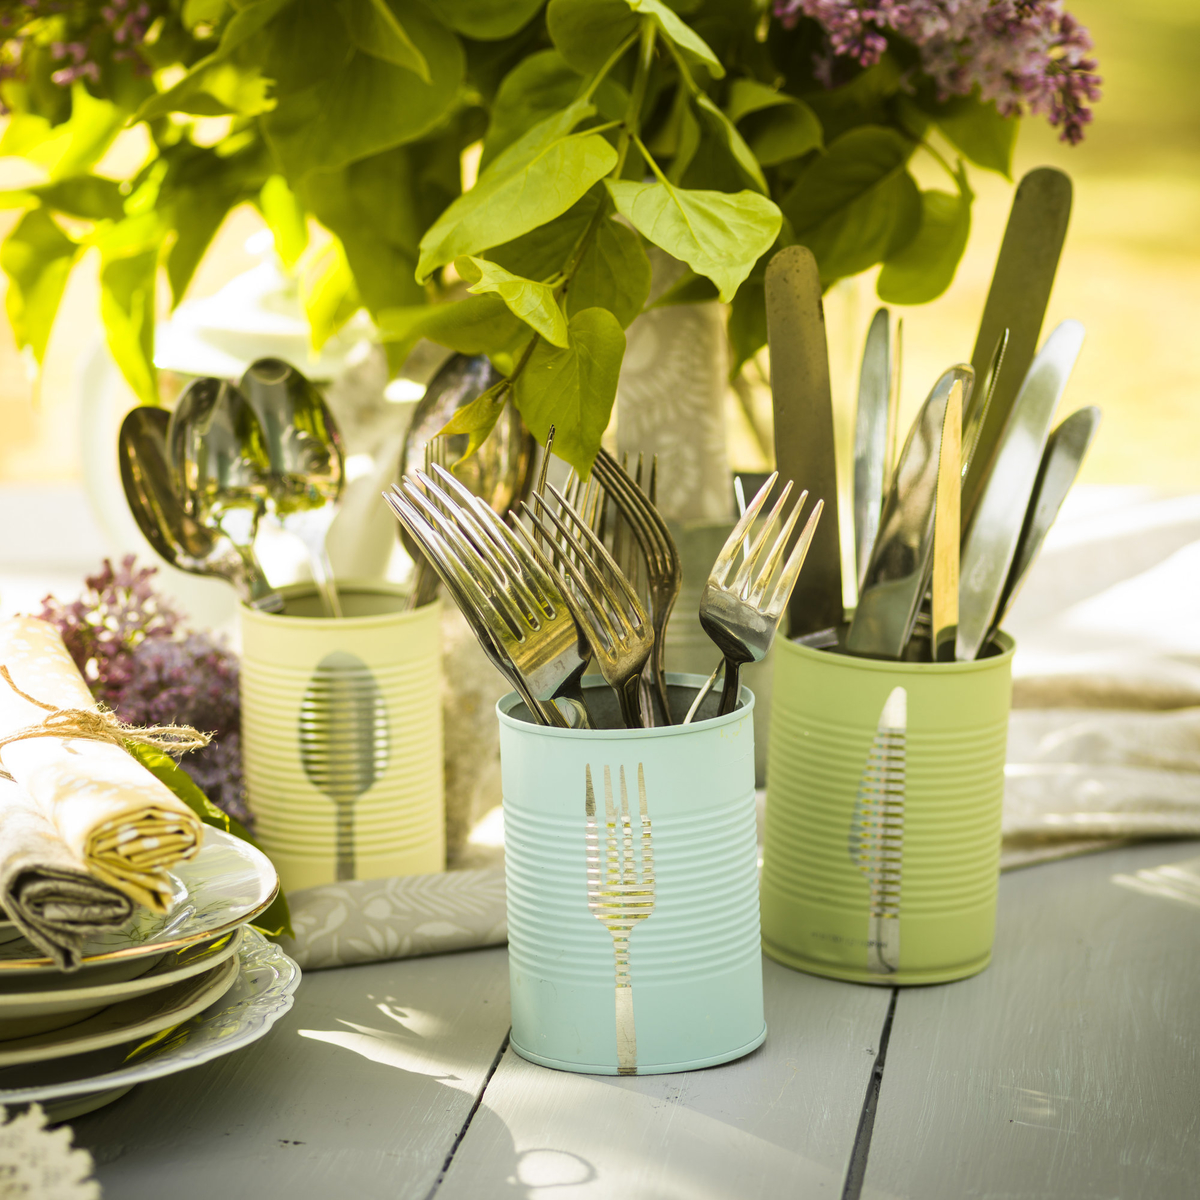 Use spray paint to organise your cutlery